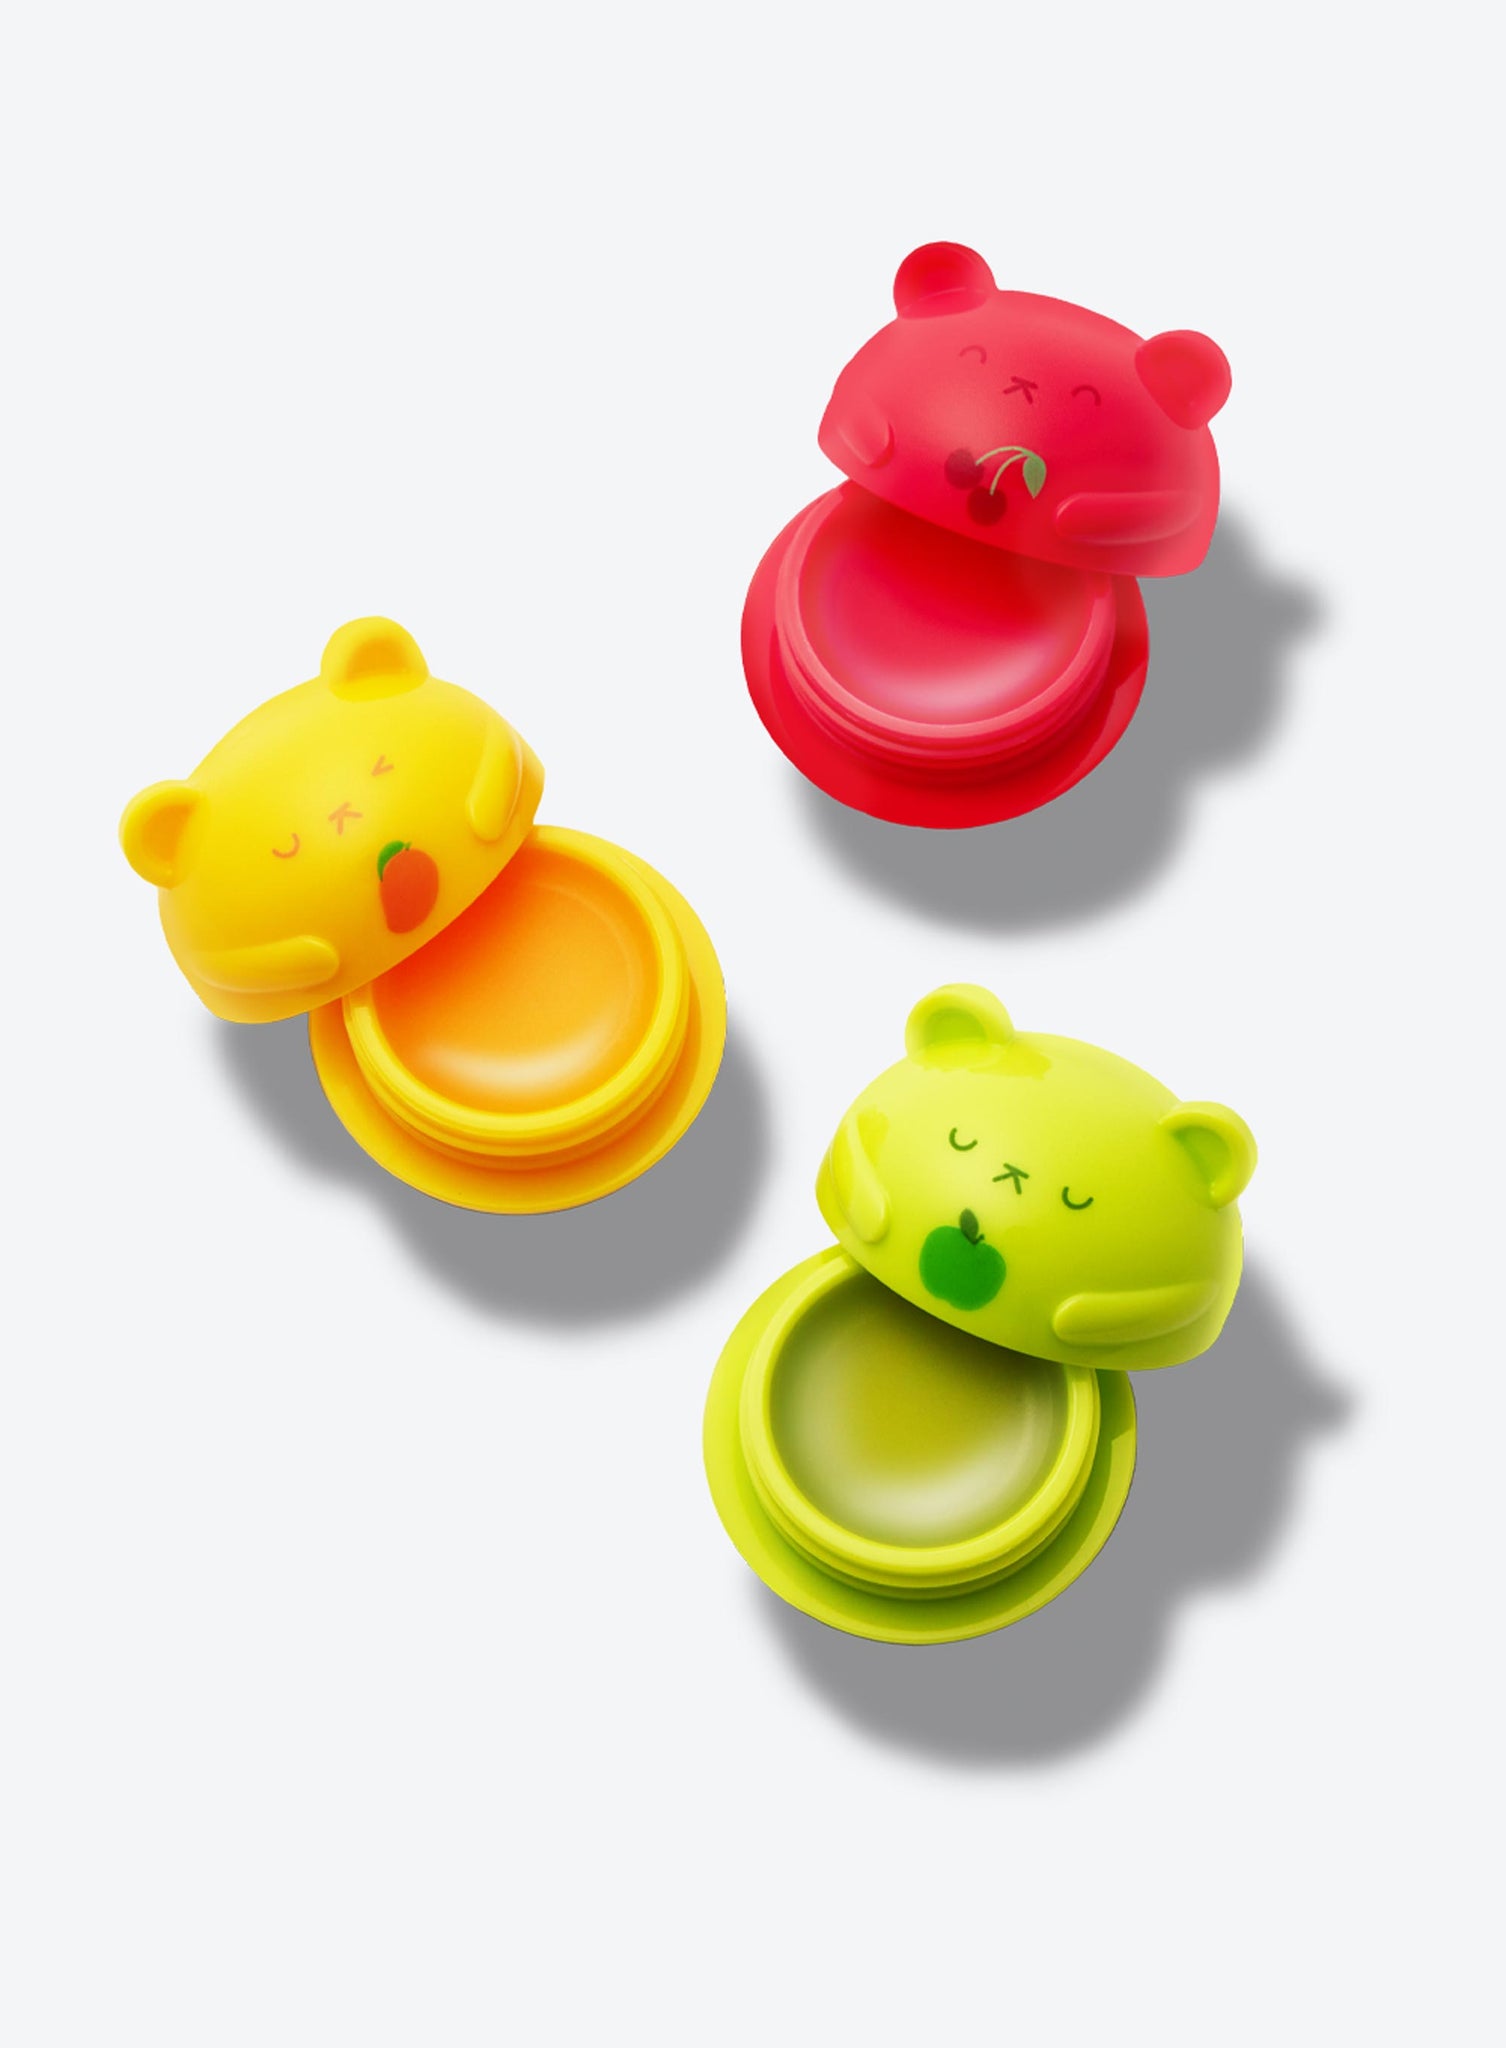 The Beary Merry Lip Balm bear containers open to show the lip balm inside, which is applied with a finger